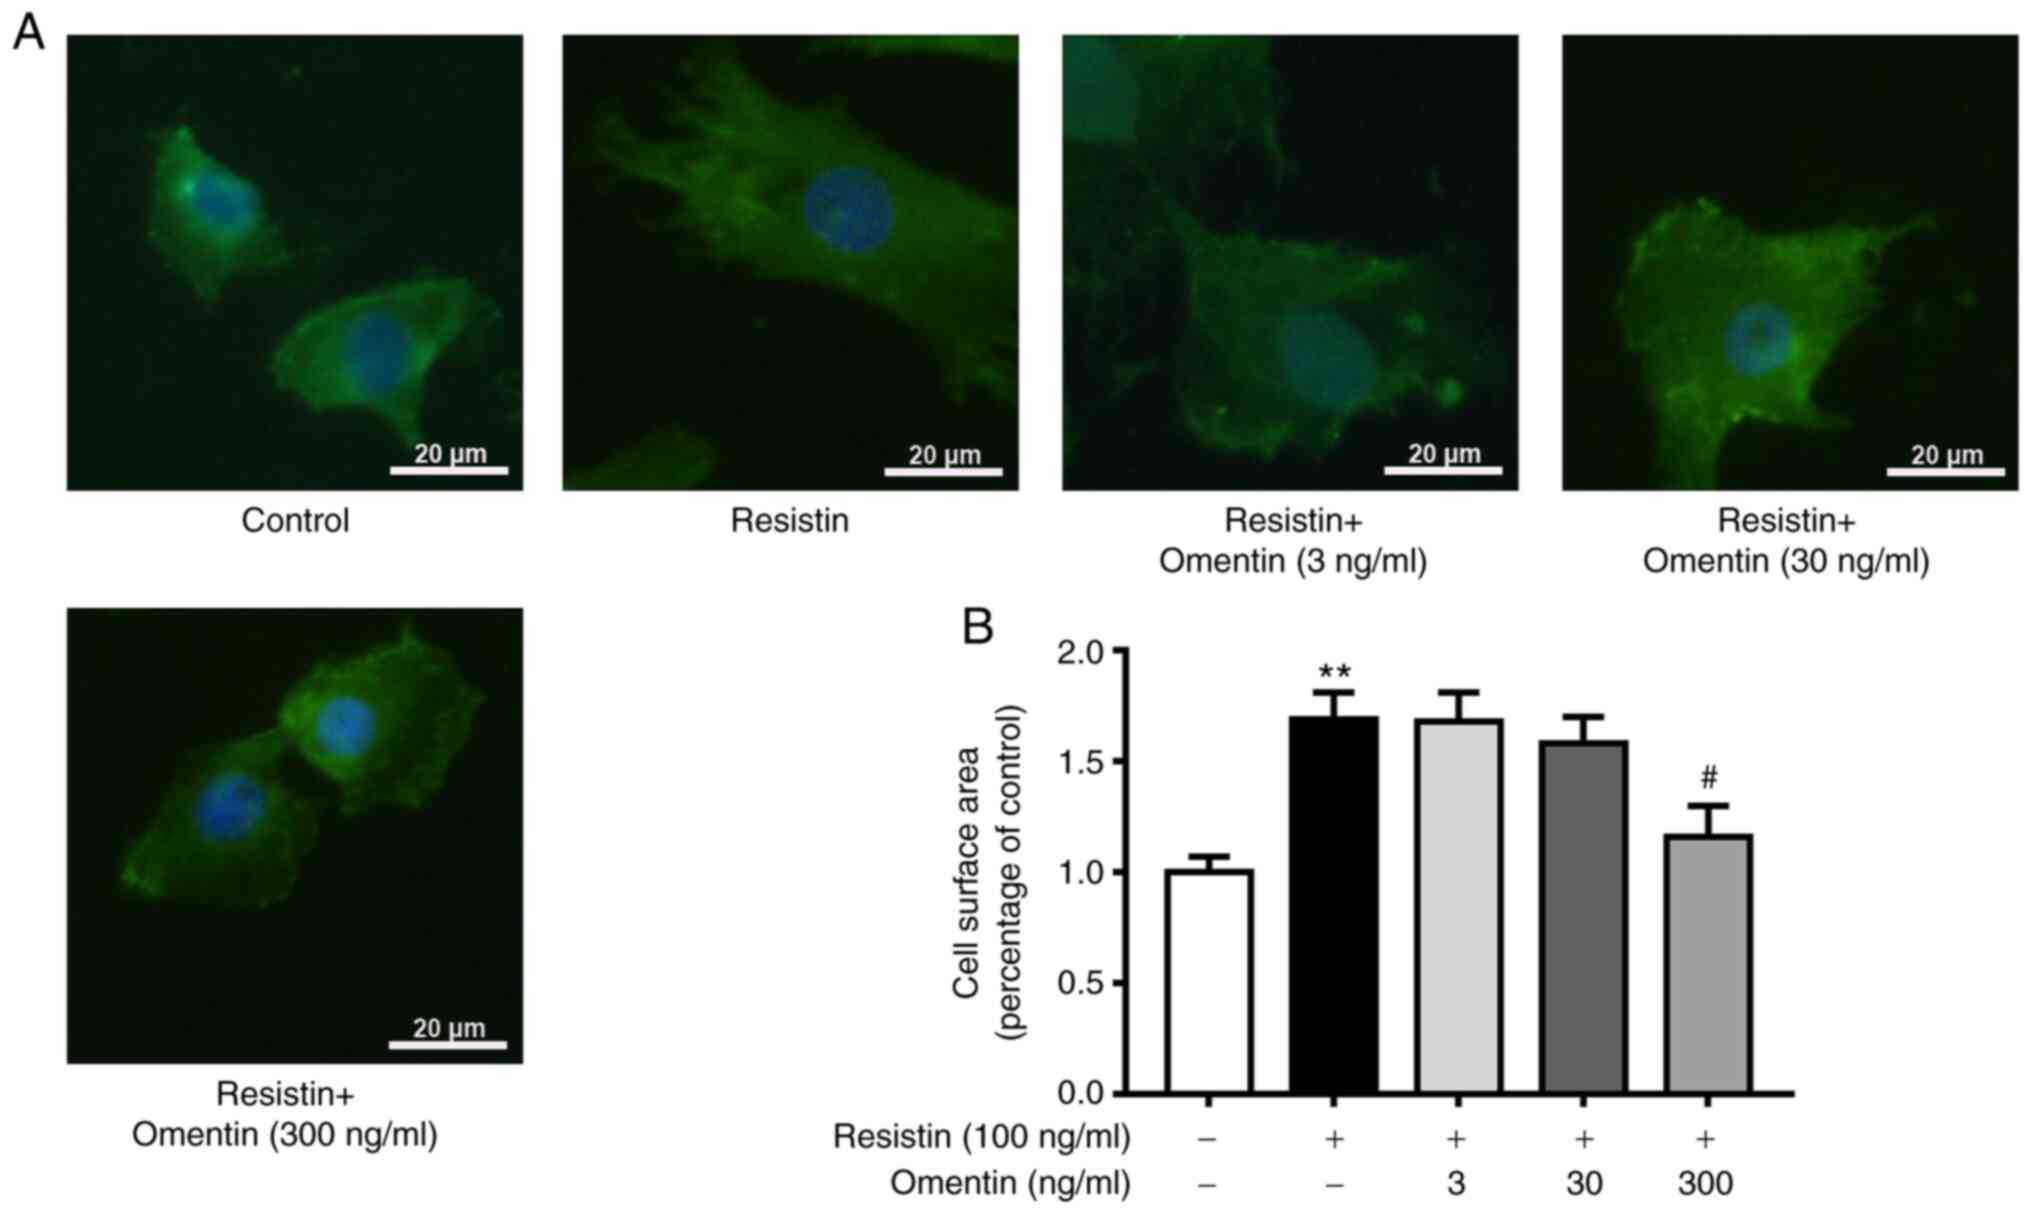 Omentin inhibits the resistin‑induced hypertrophy of H9c2 